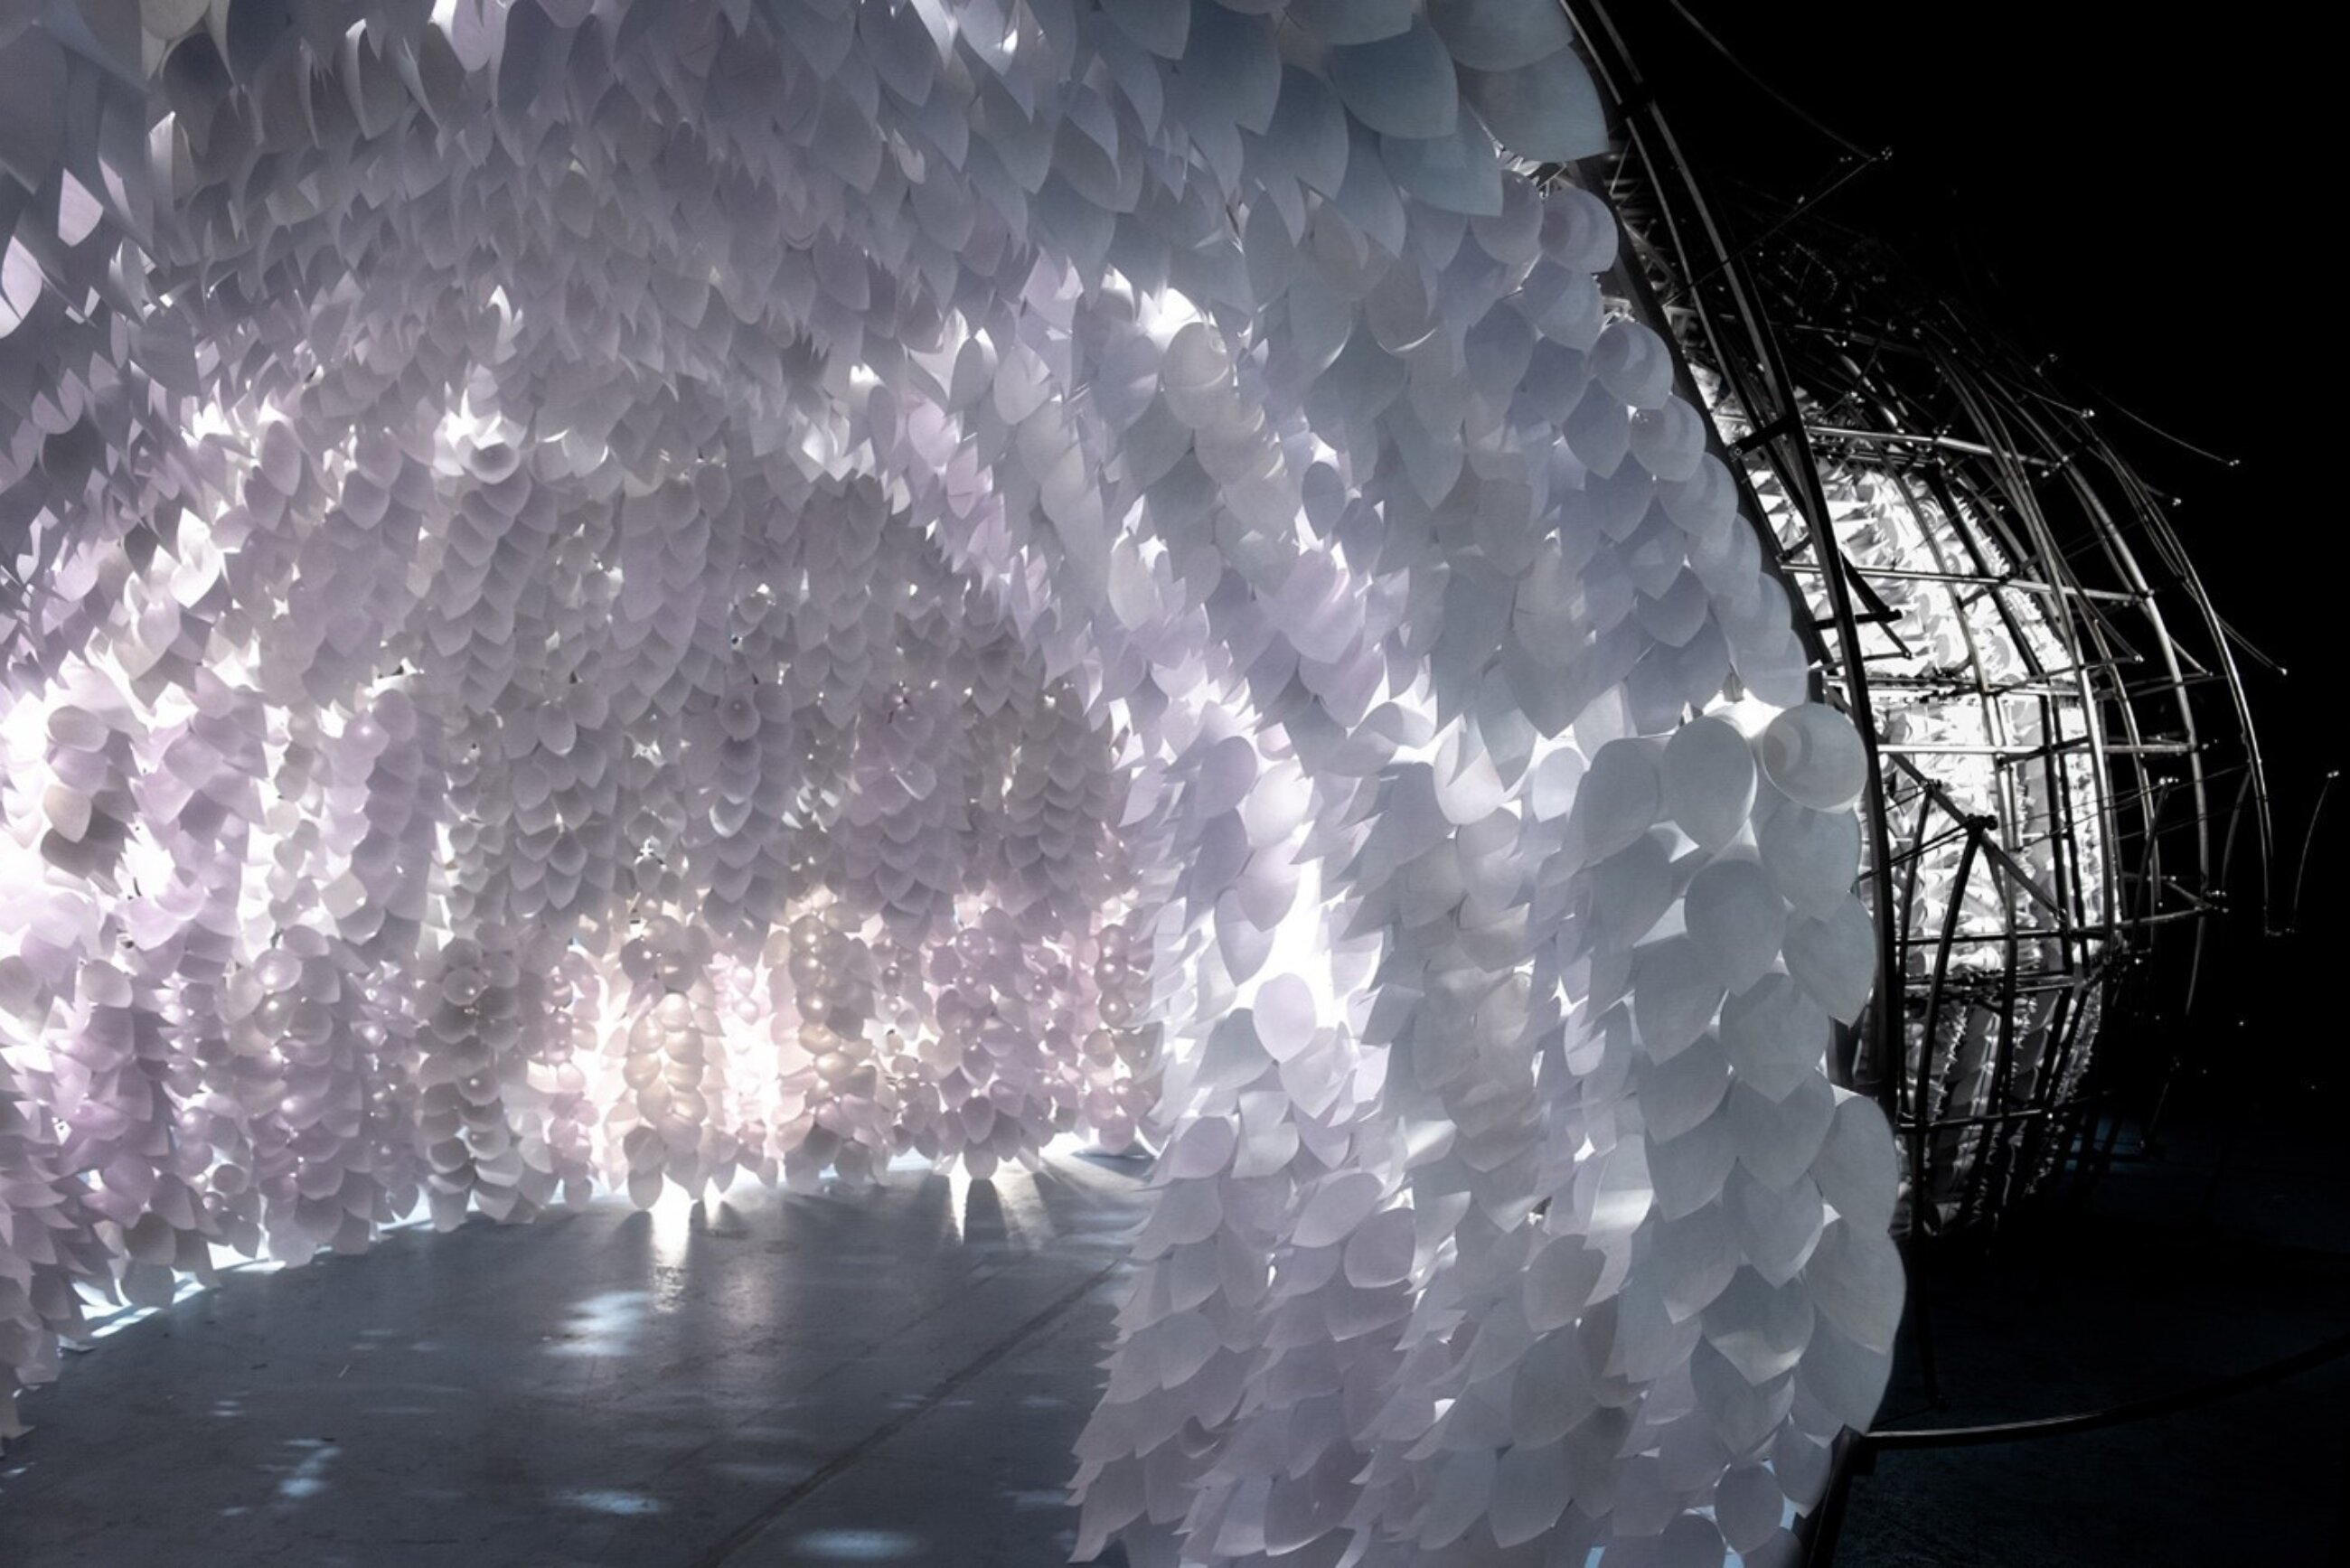 Breathing room Installation. In the image is a large tunnel of soft white decorations which blanket the inner tube walls of the tunnel and have light peeking through.